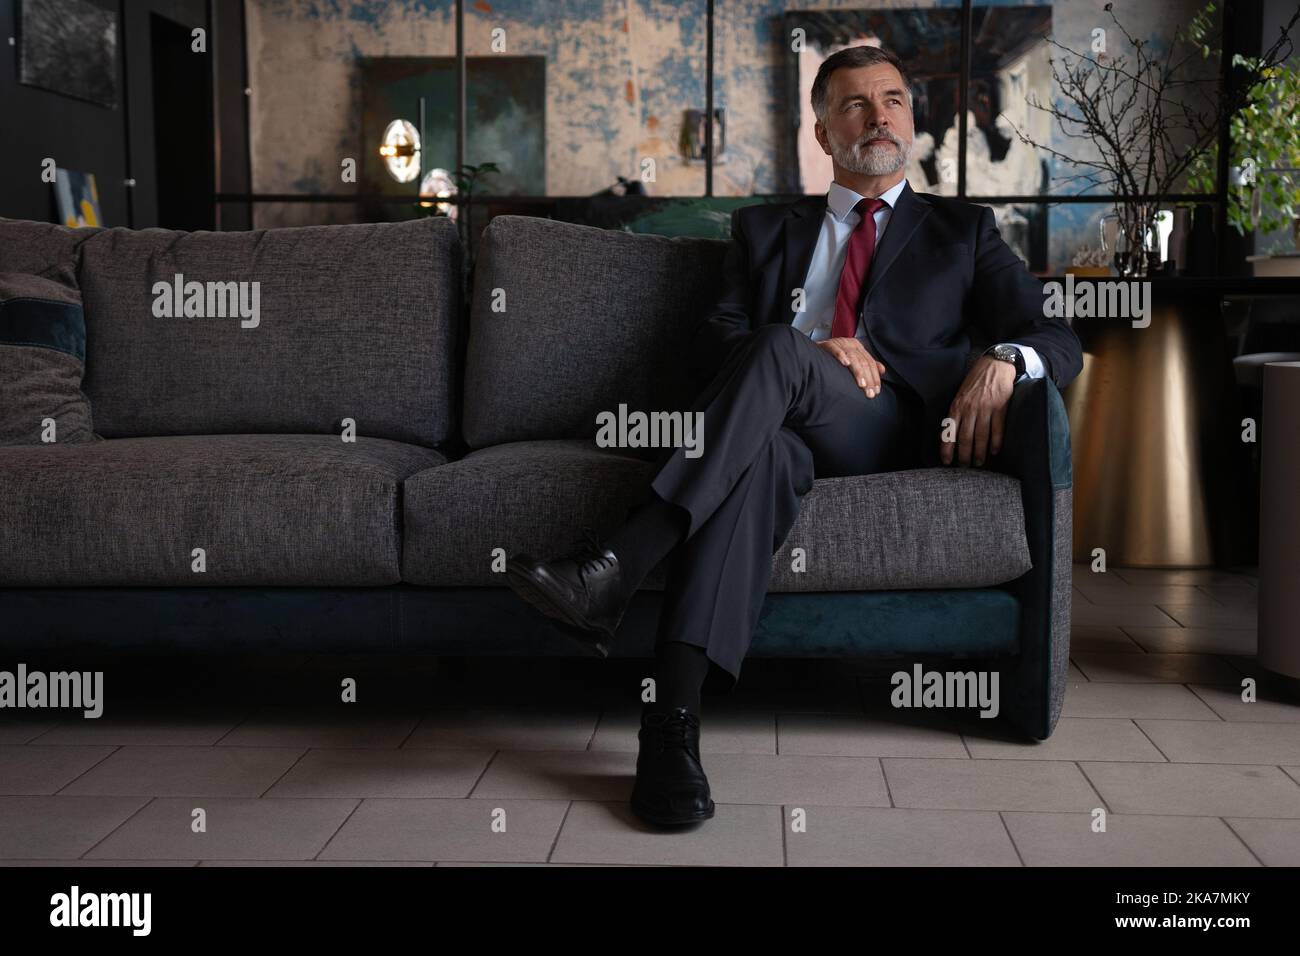 Starting new working day. Mature businessman sitting on the couch in office. Stock Photo